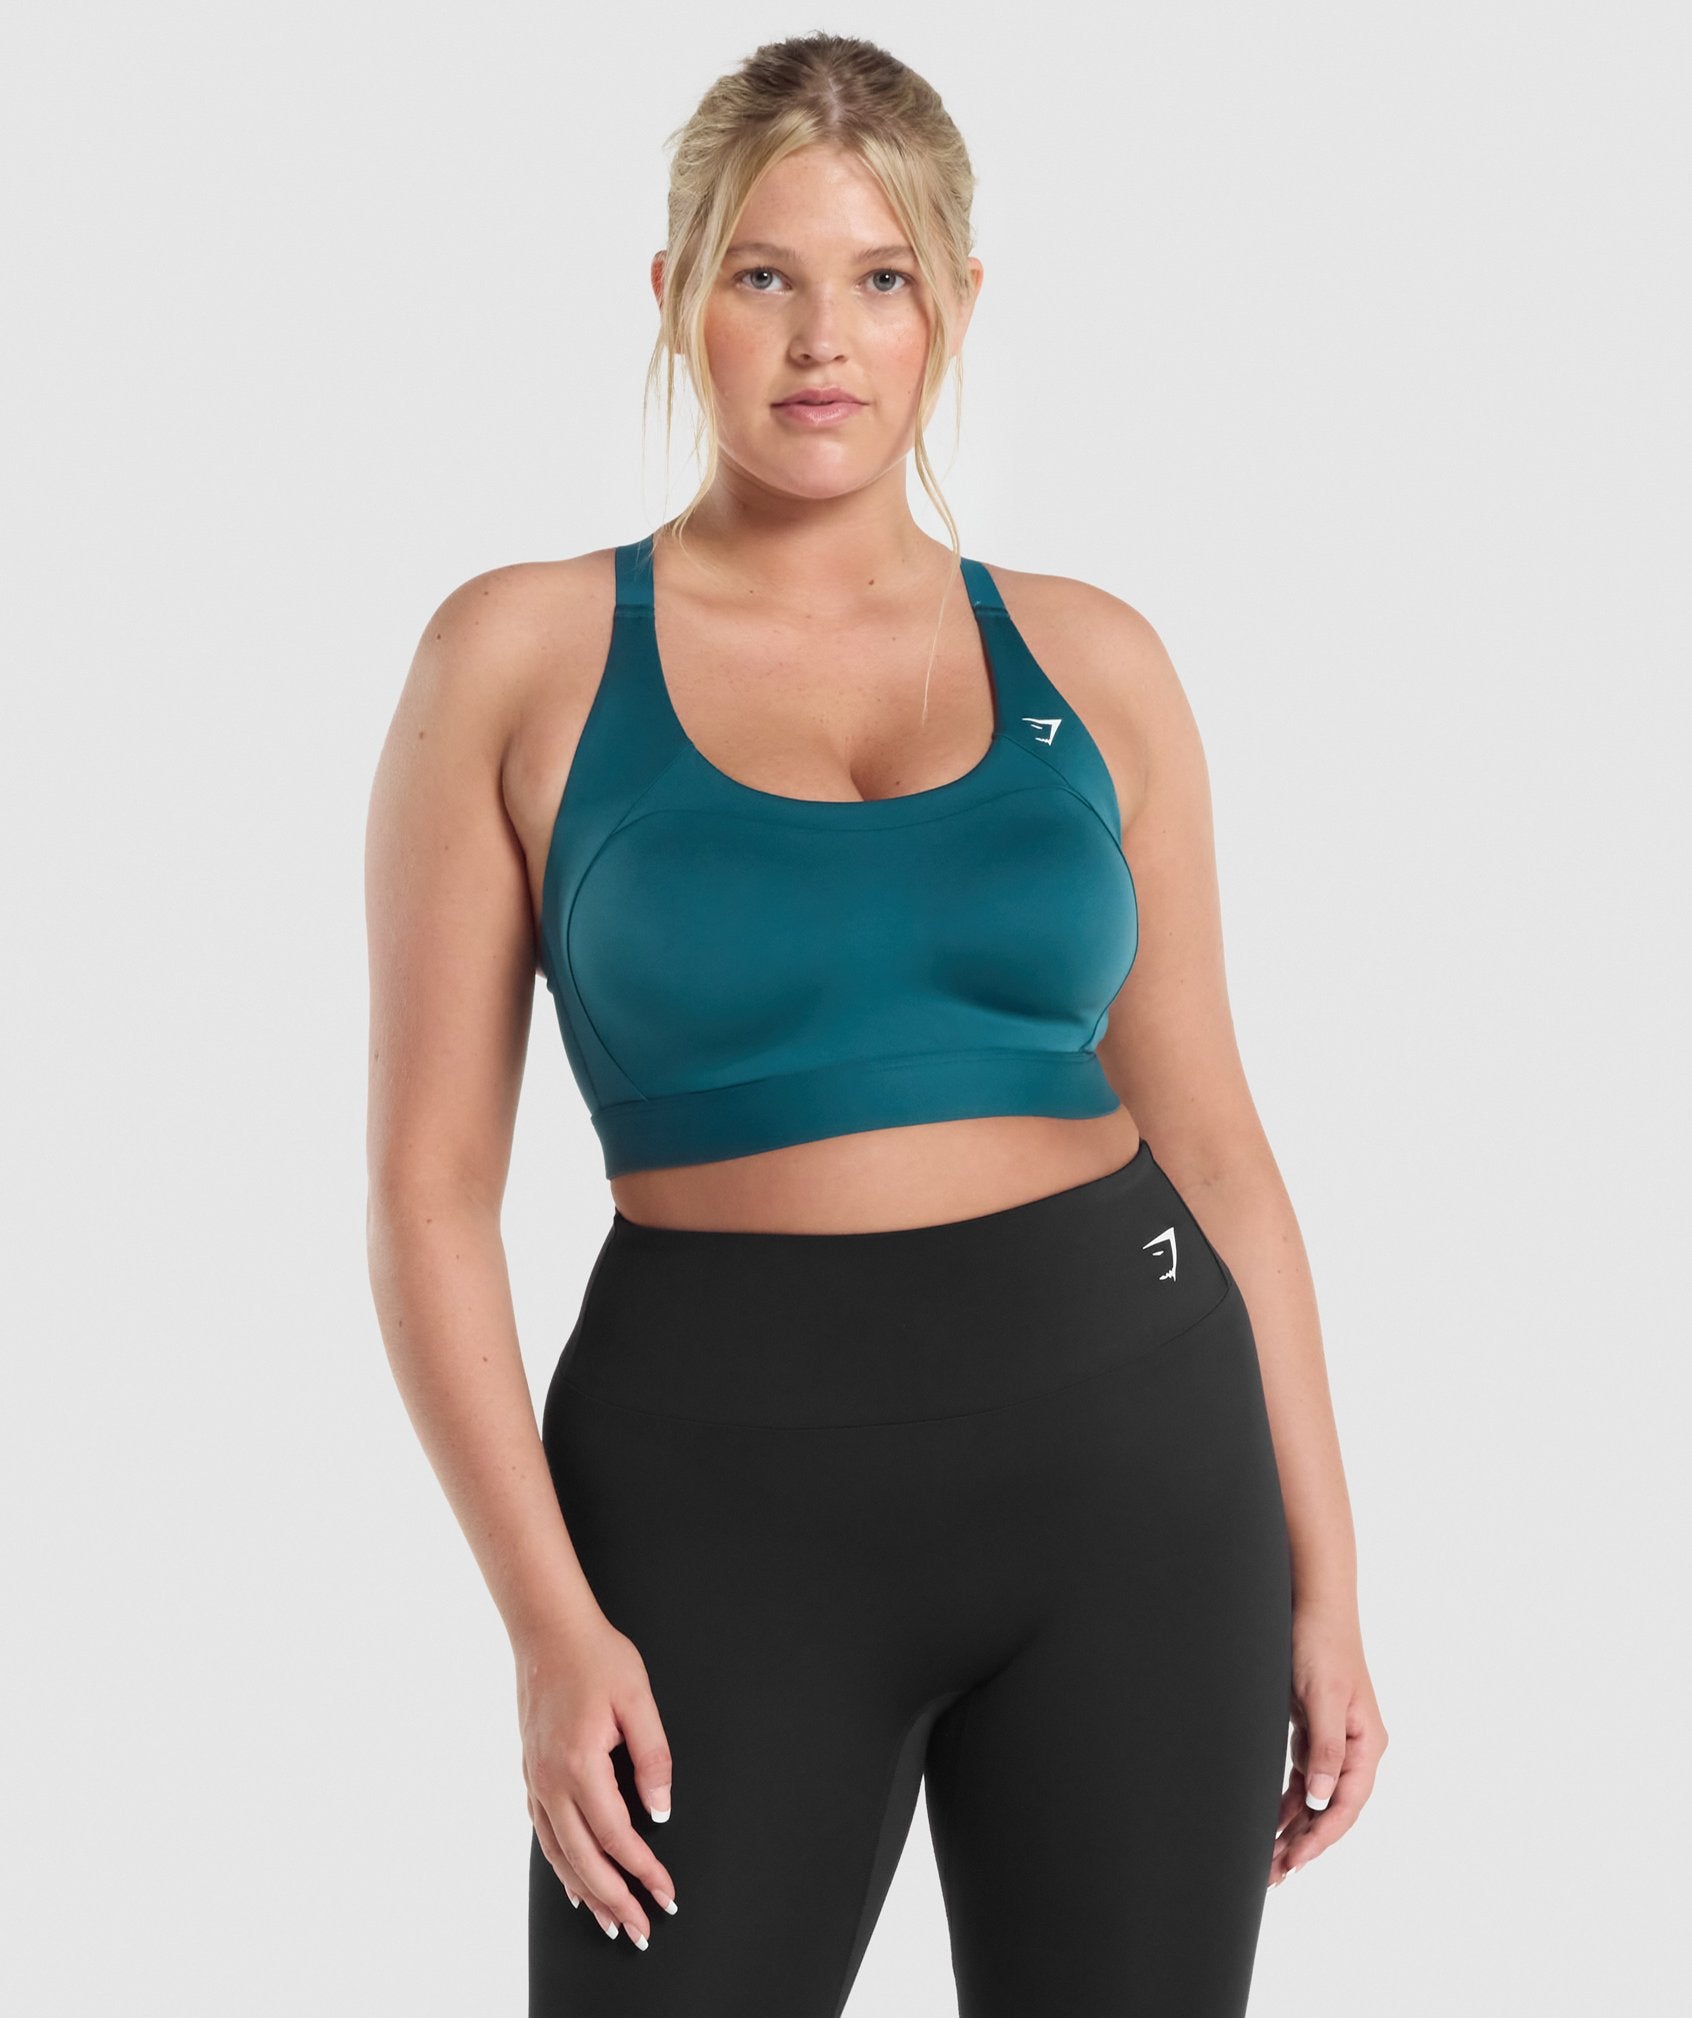 Racer Back Sports Bra in Teal - view 1